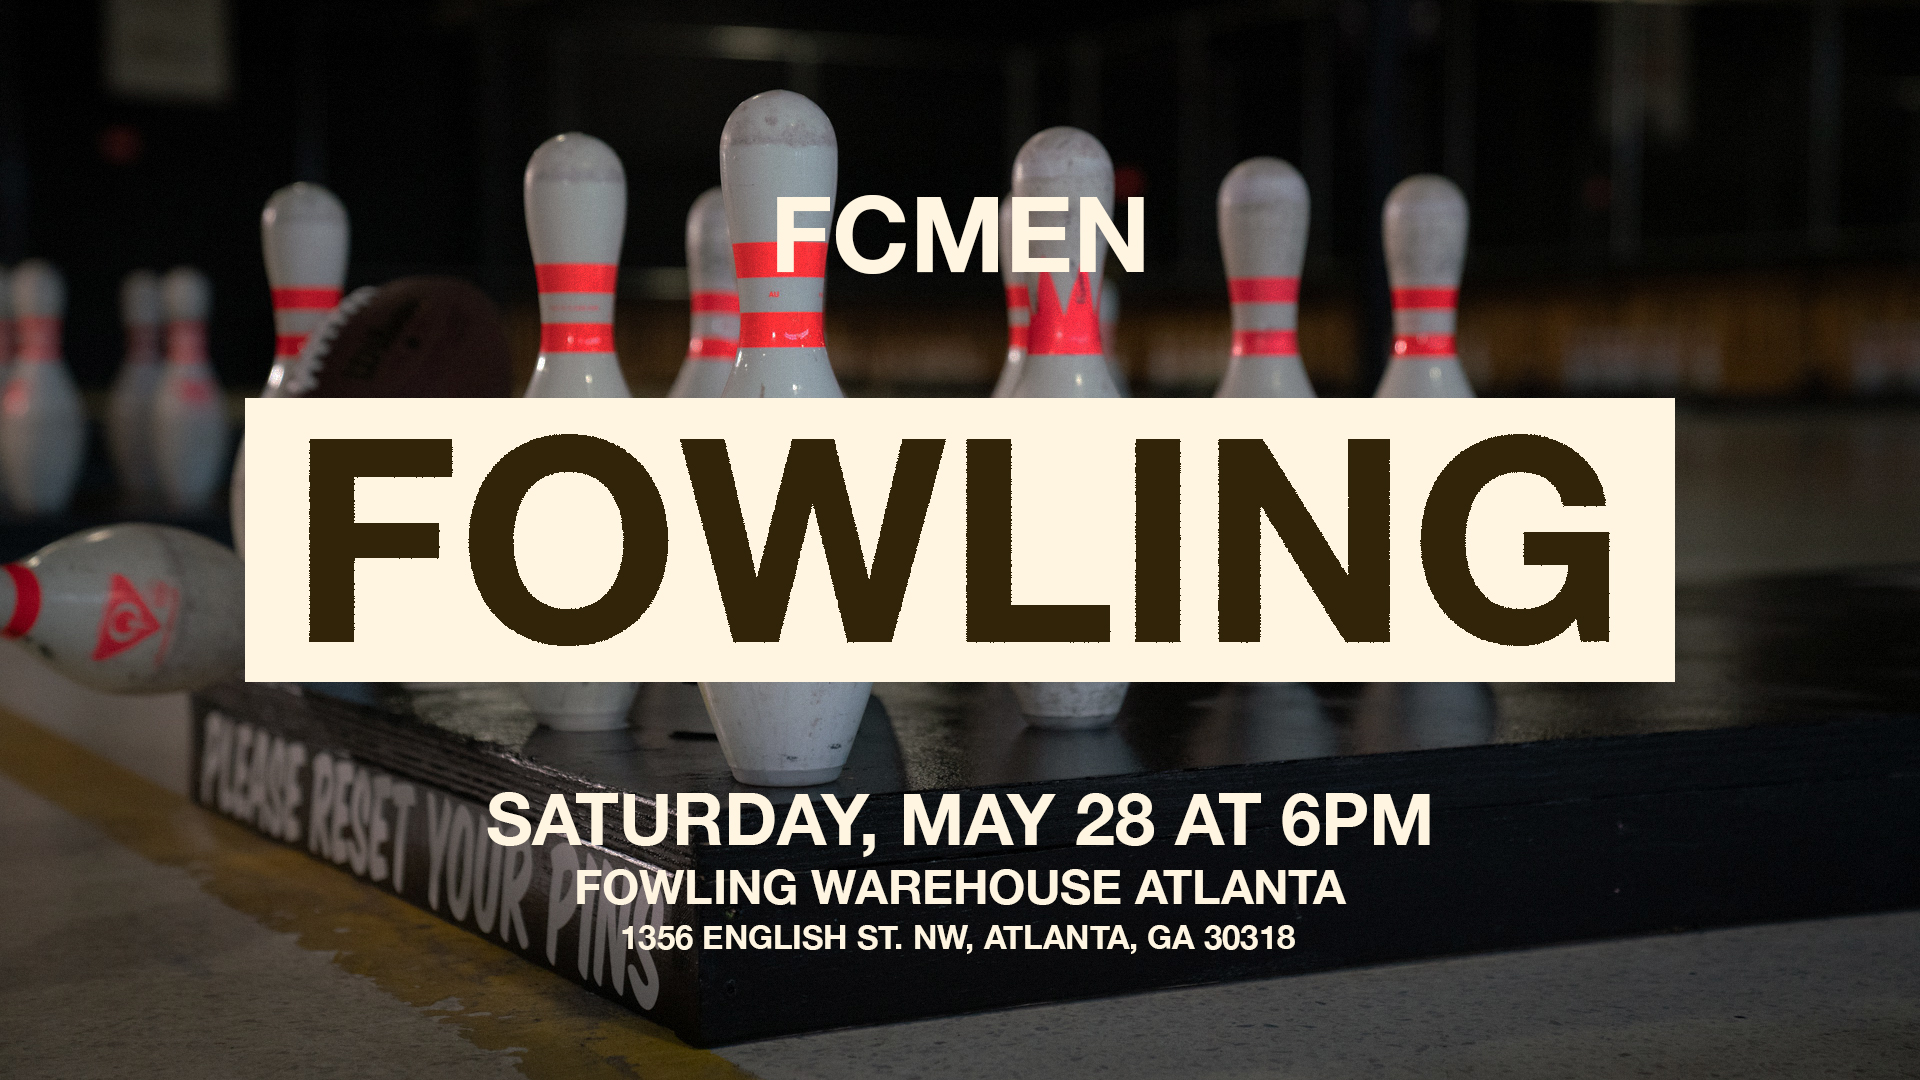 Midtown Men Fowling at the Midtown campus